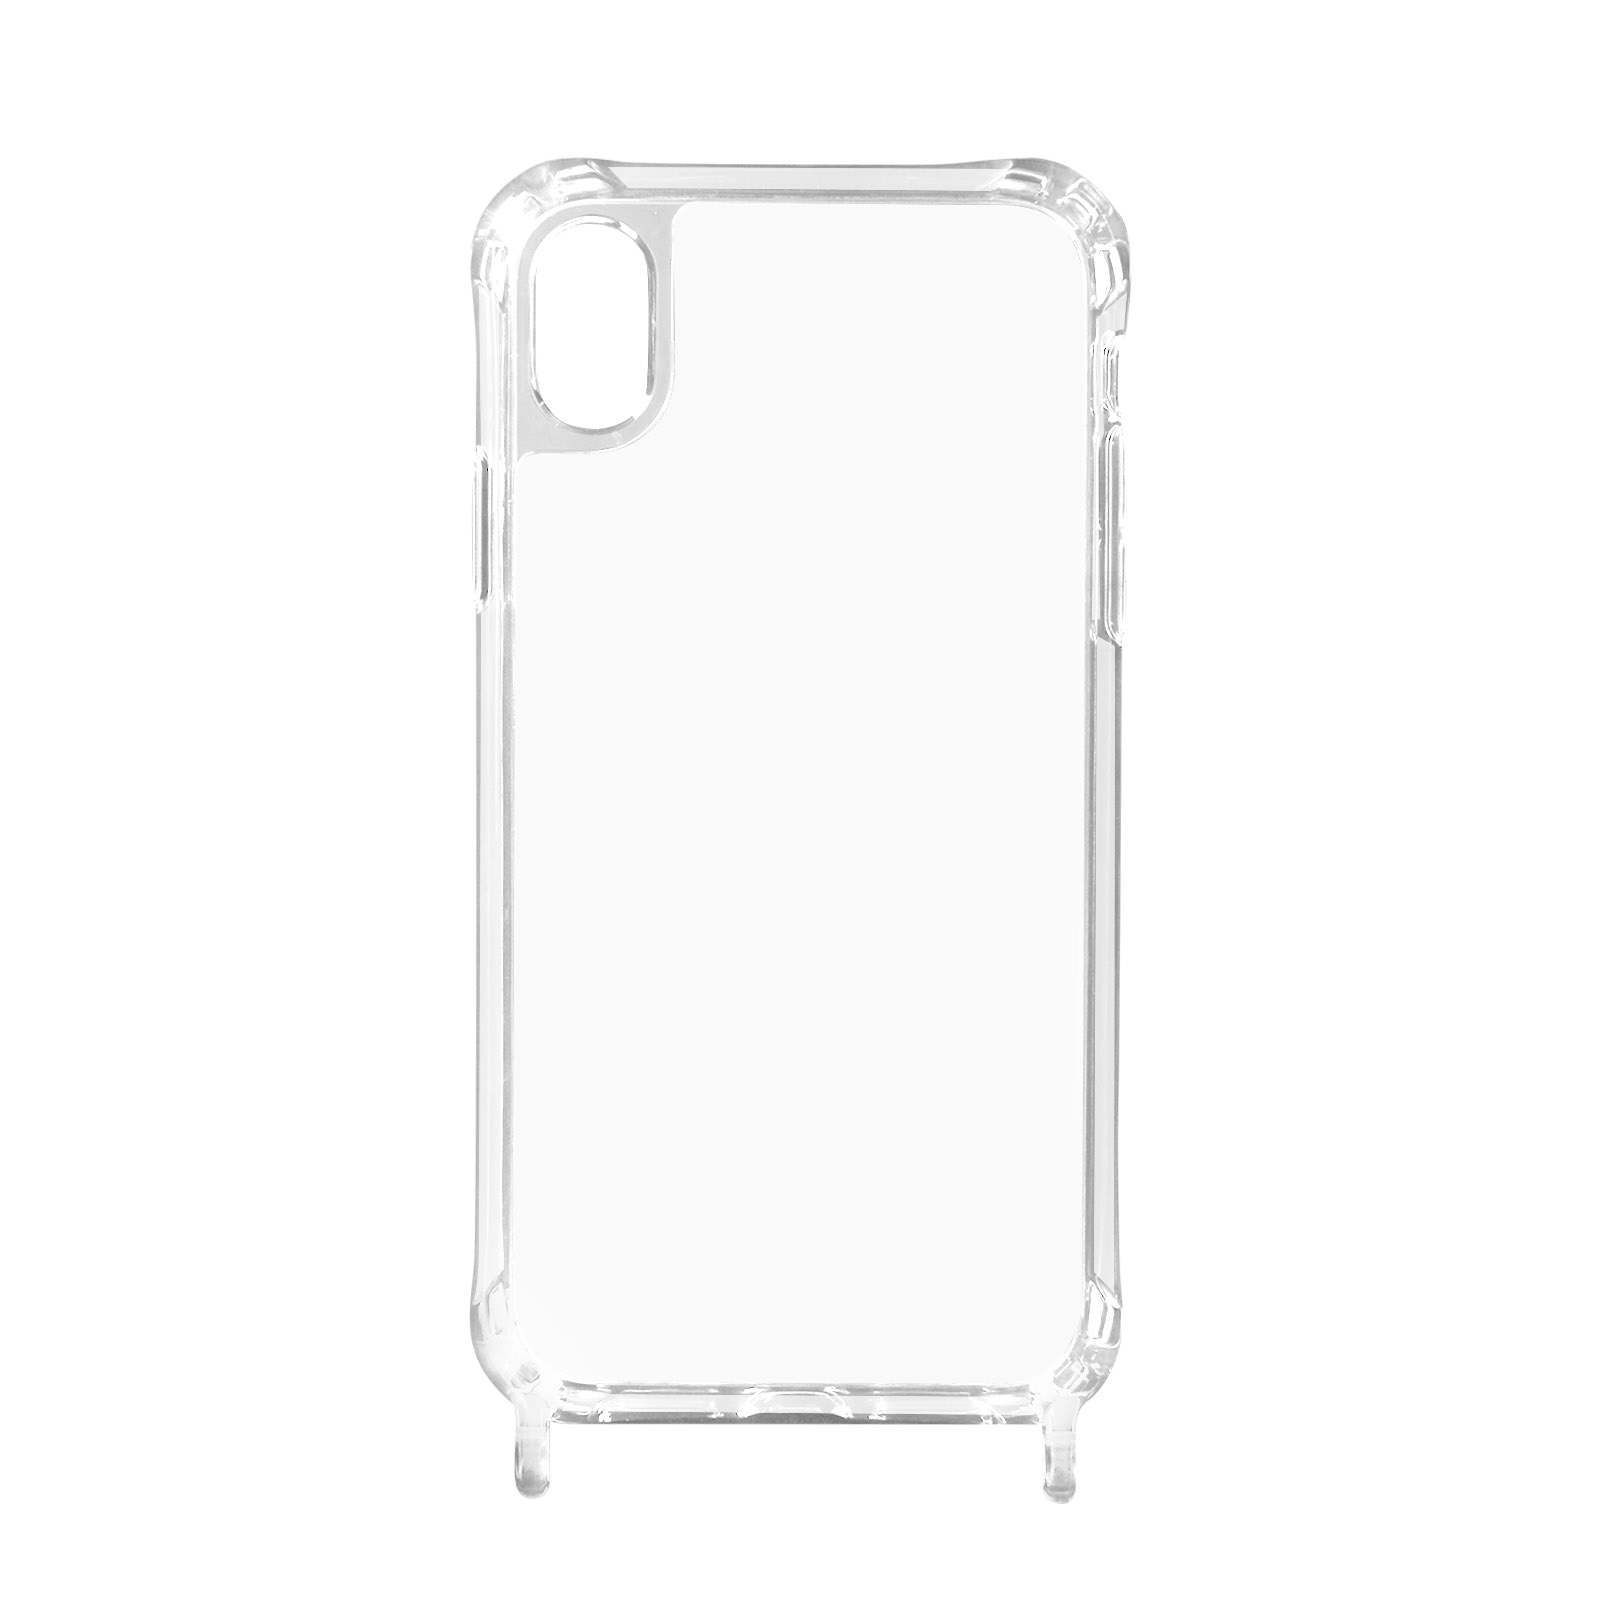 XR, Series, iPhone Rings Transparent AVIZAR Backcover, Apple,